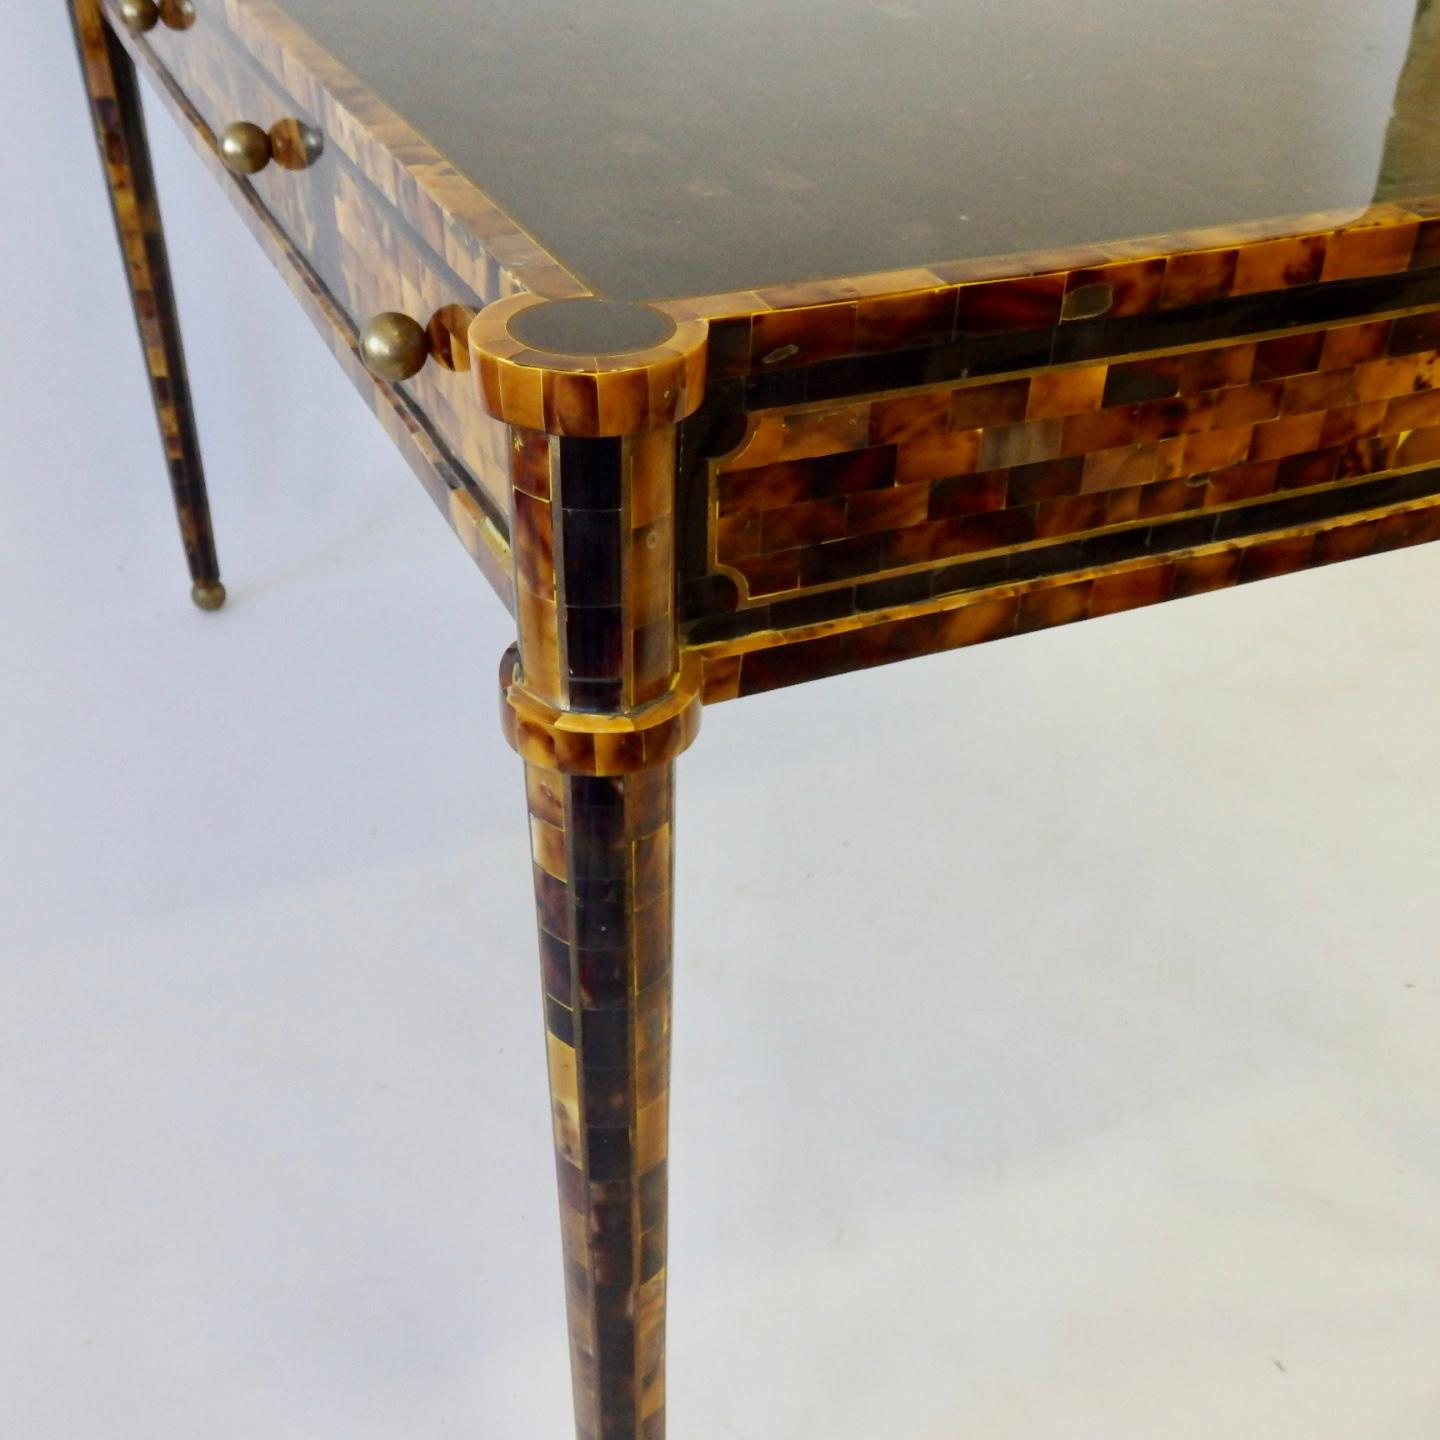 Elegant writing desk with three drawers on one side. Covered in rectangular horn tiles.